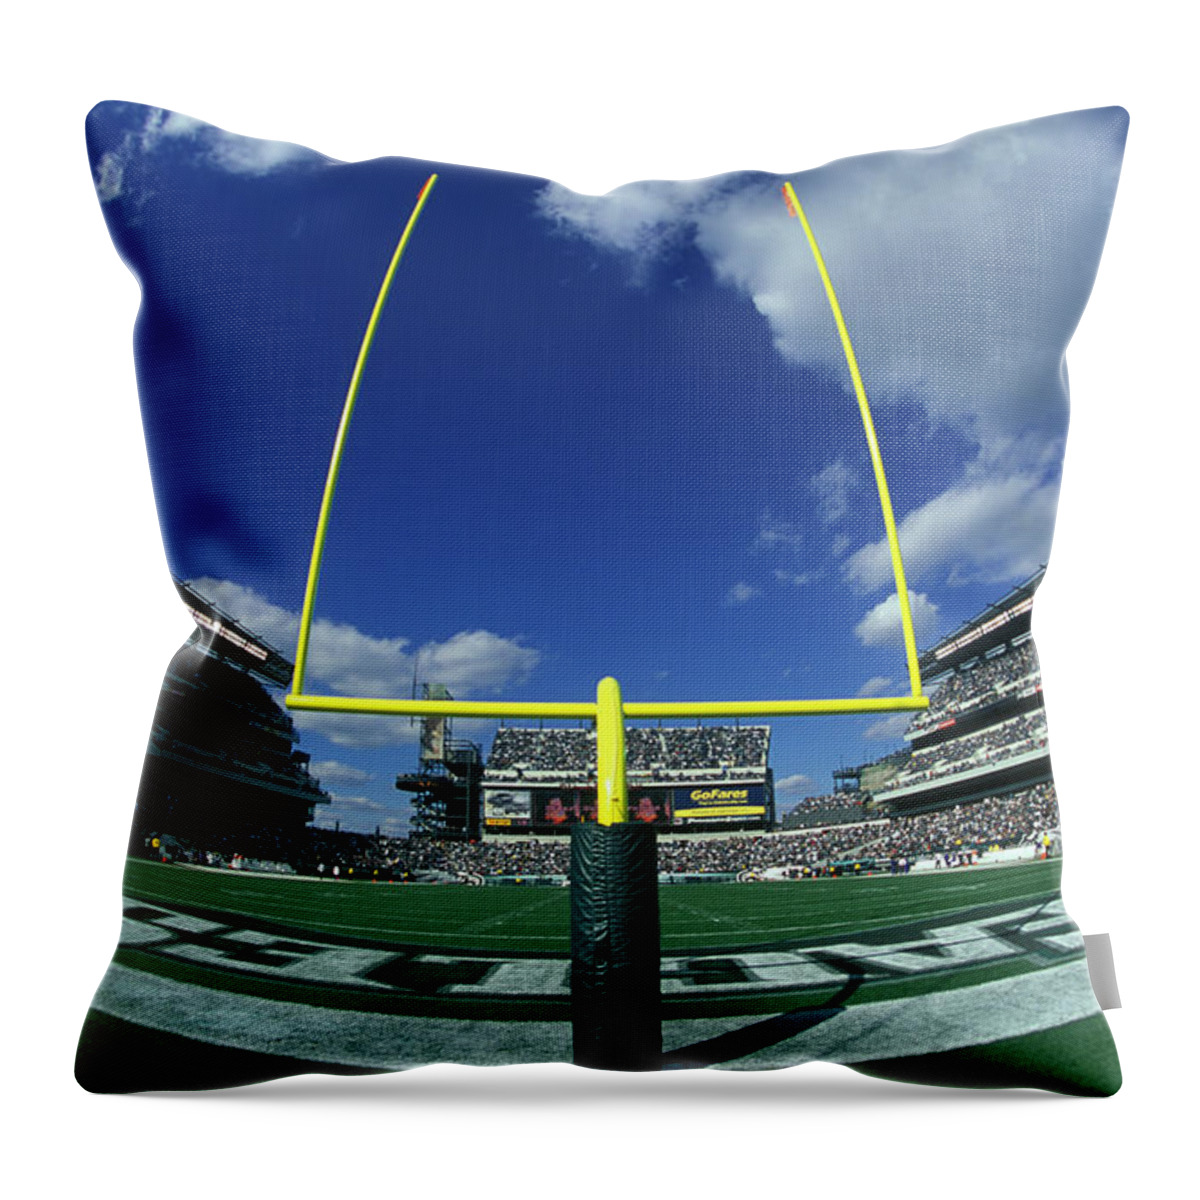 Photography Throw Pillow featuring the photograph Lincoln Financial Field Eagles Football by Panoramic Images